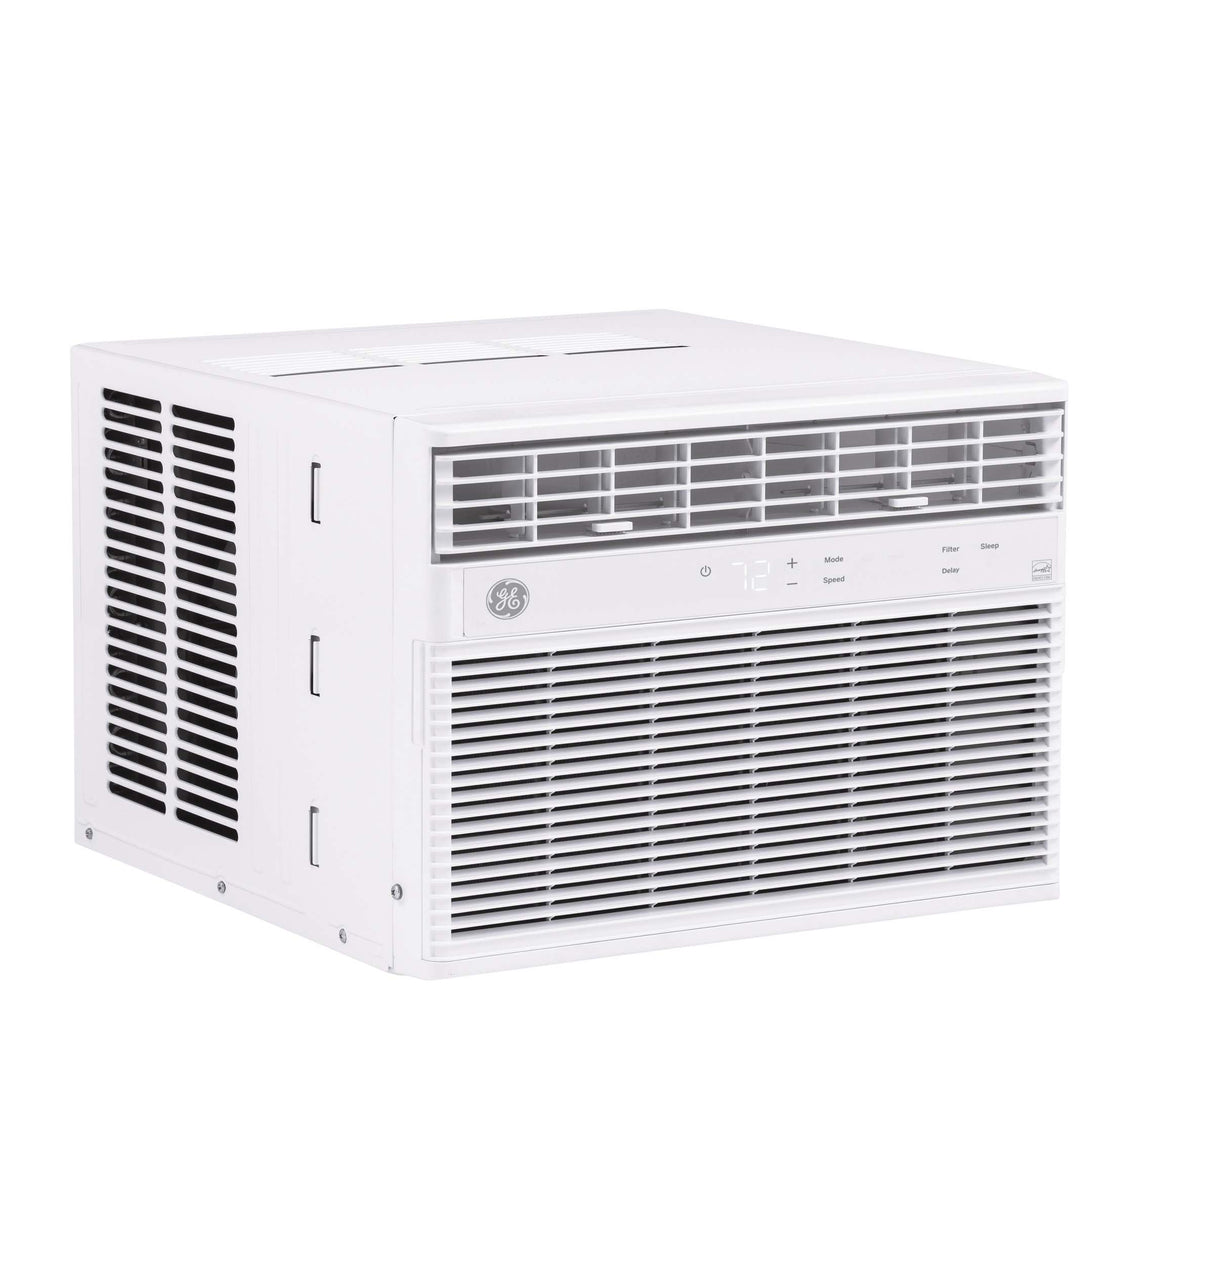 GE(R) 18,000 BTU Heat/Cool Electronic Window Air Conditioner for Extra-Large Rooms up to 1000 sq. ft. - (AHE18DZ)